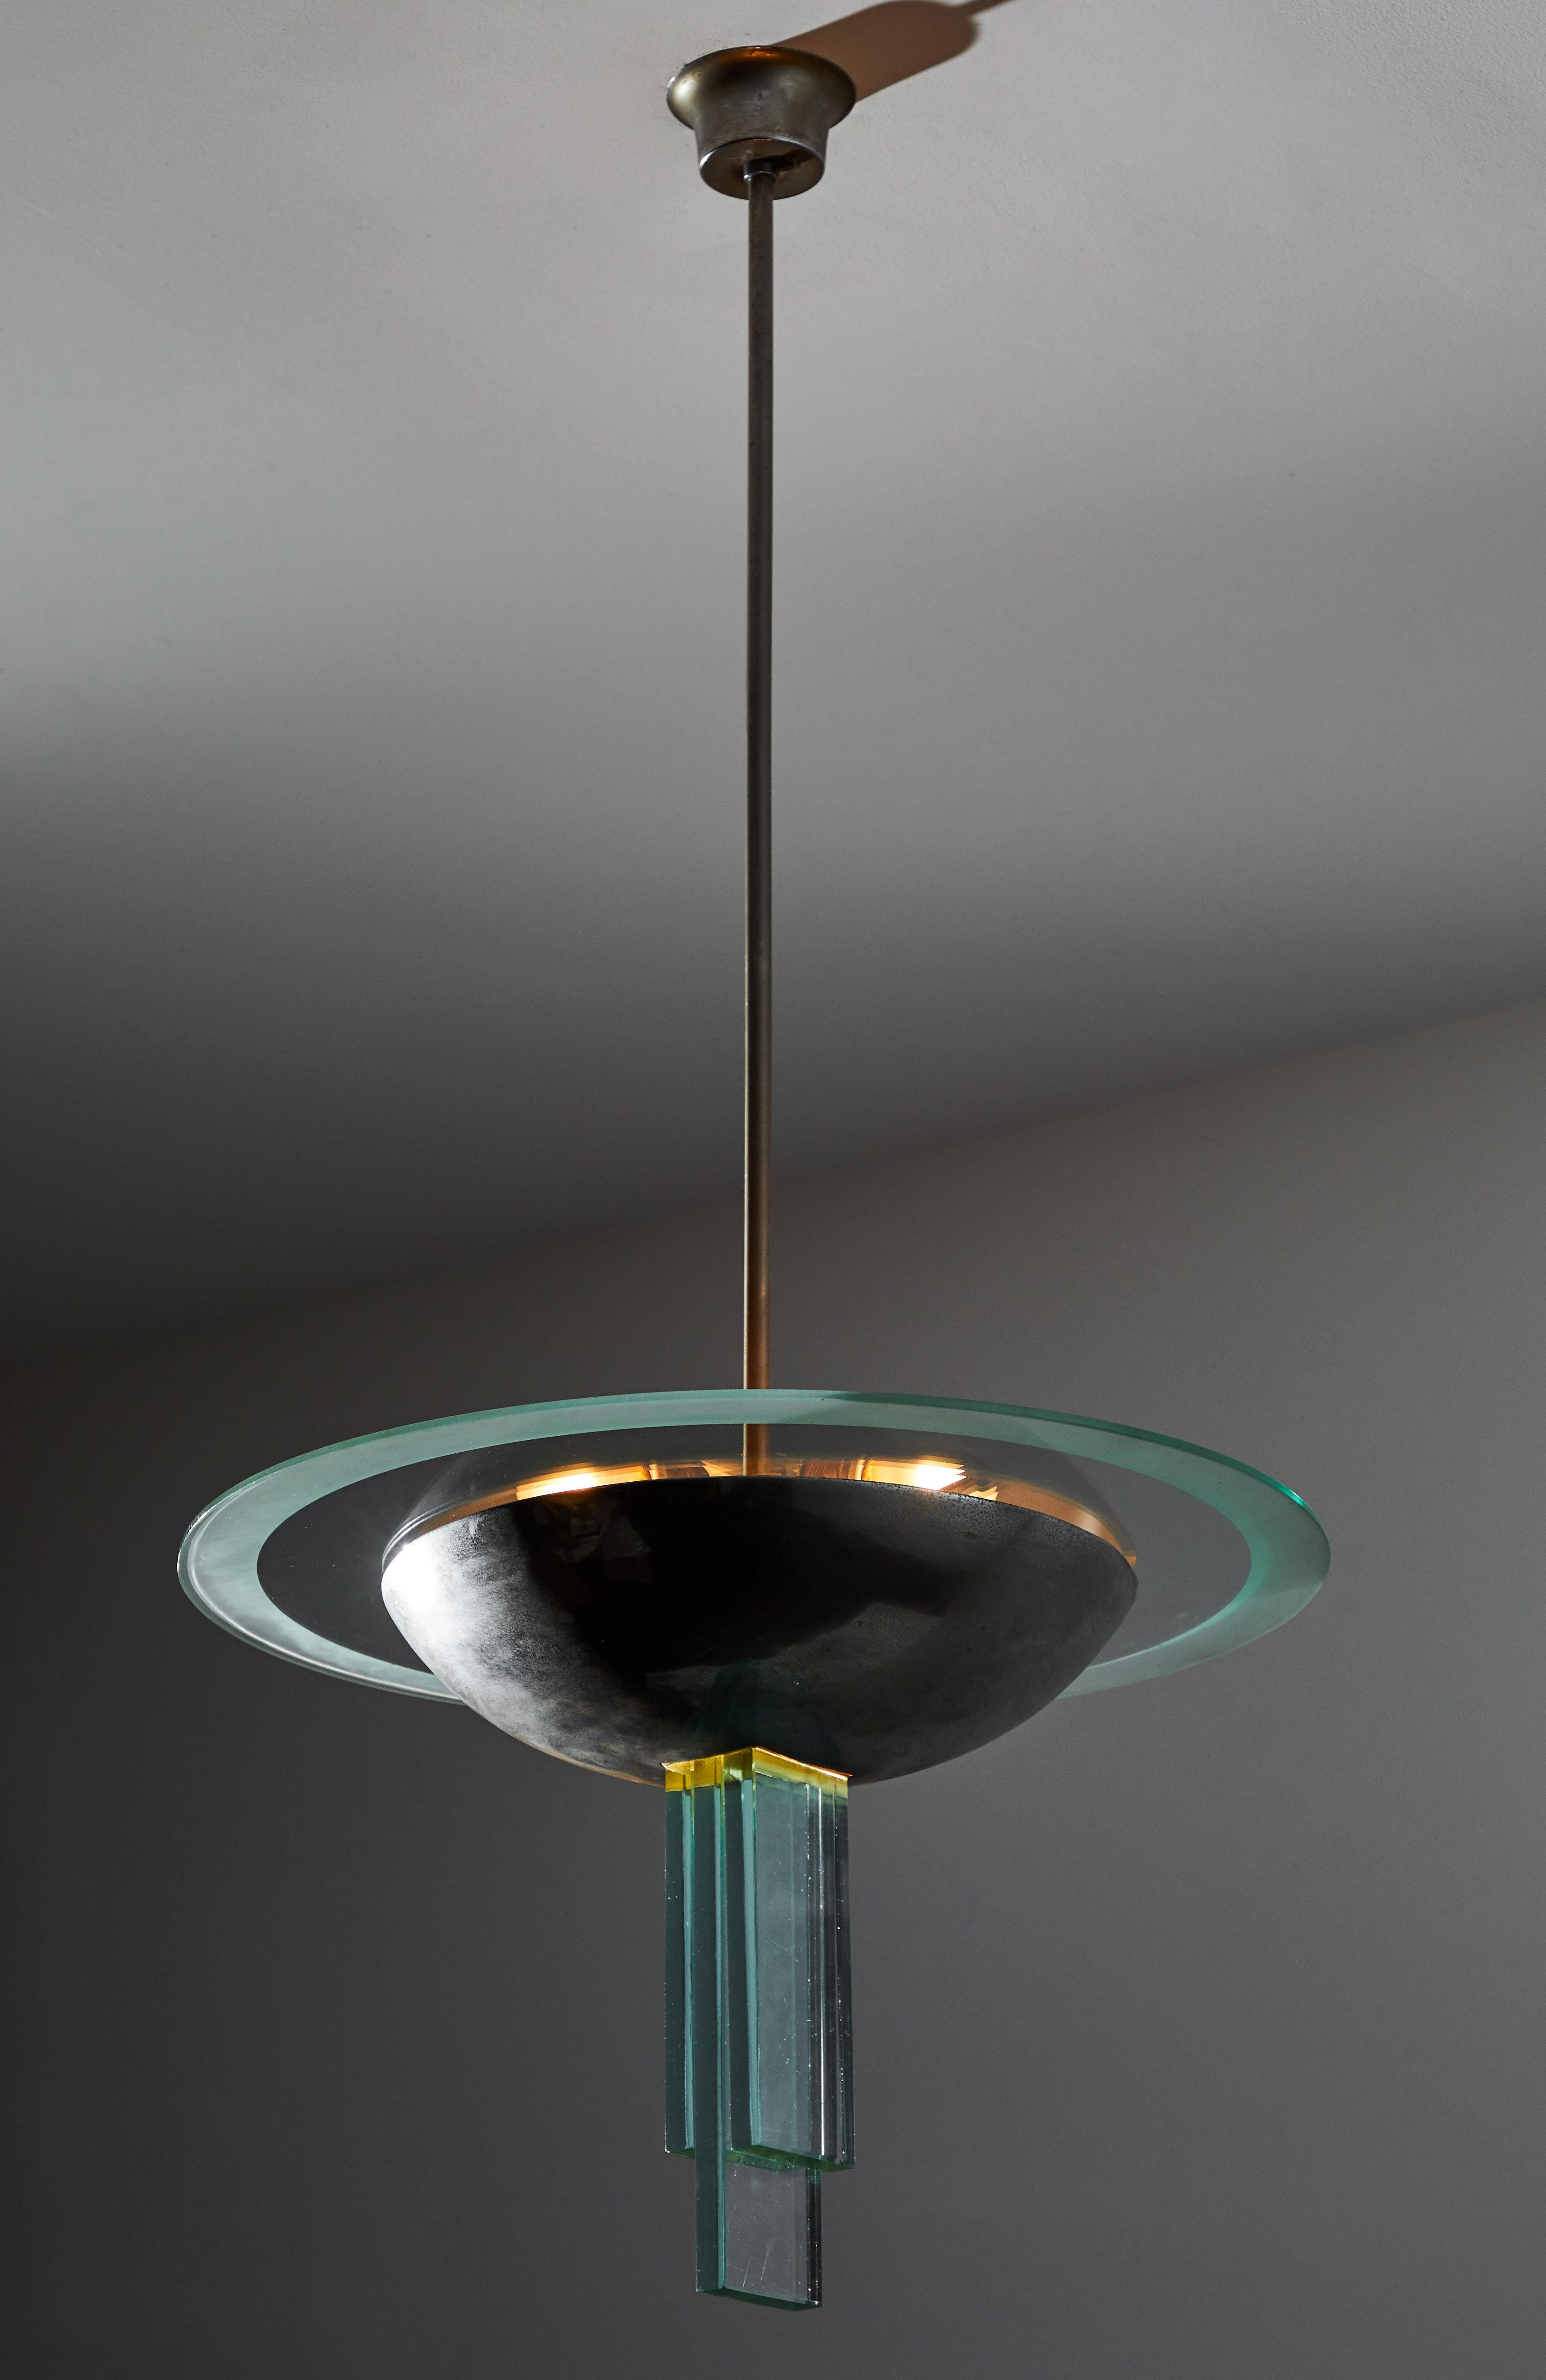 Suspension light attributed to Pietro Chiesa for Fontana Arte. Designed and manufactured in Italy, circa 1946. Naturally patinated, nickel plated steel and glass. Interior of nickel shade and three glass structures at base of light illuminate.